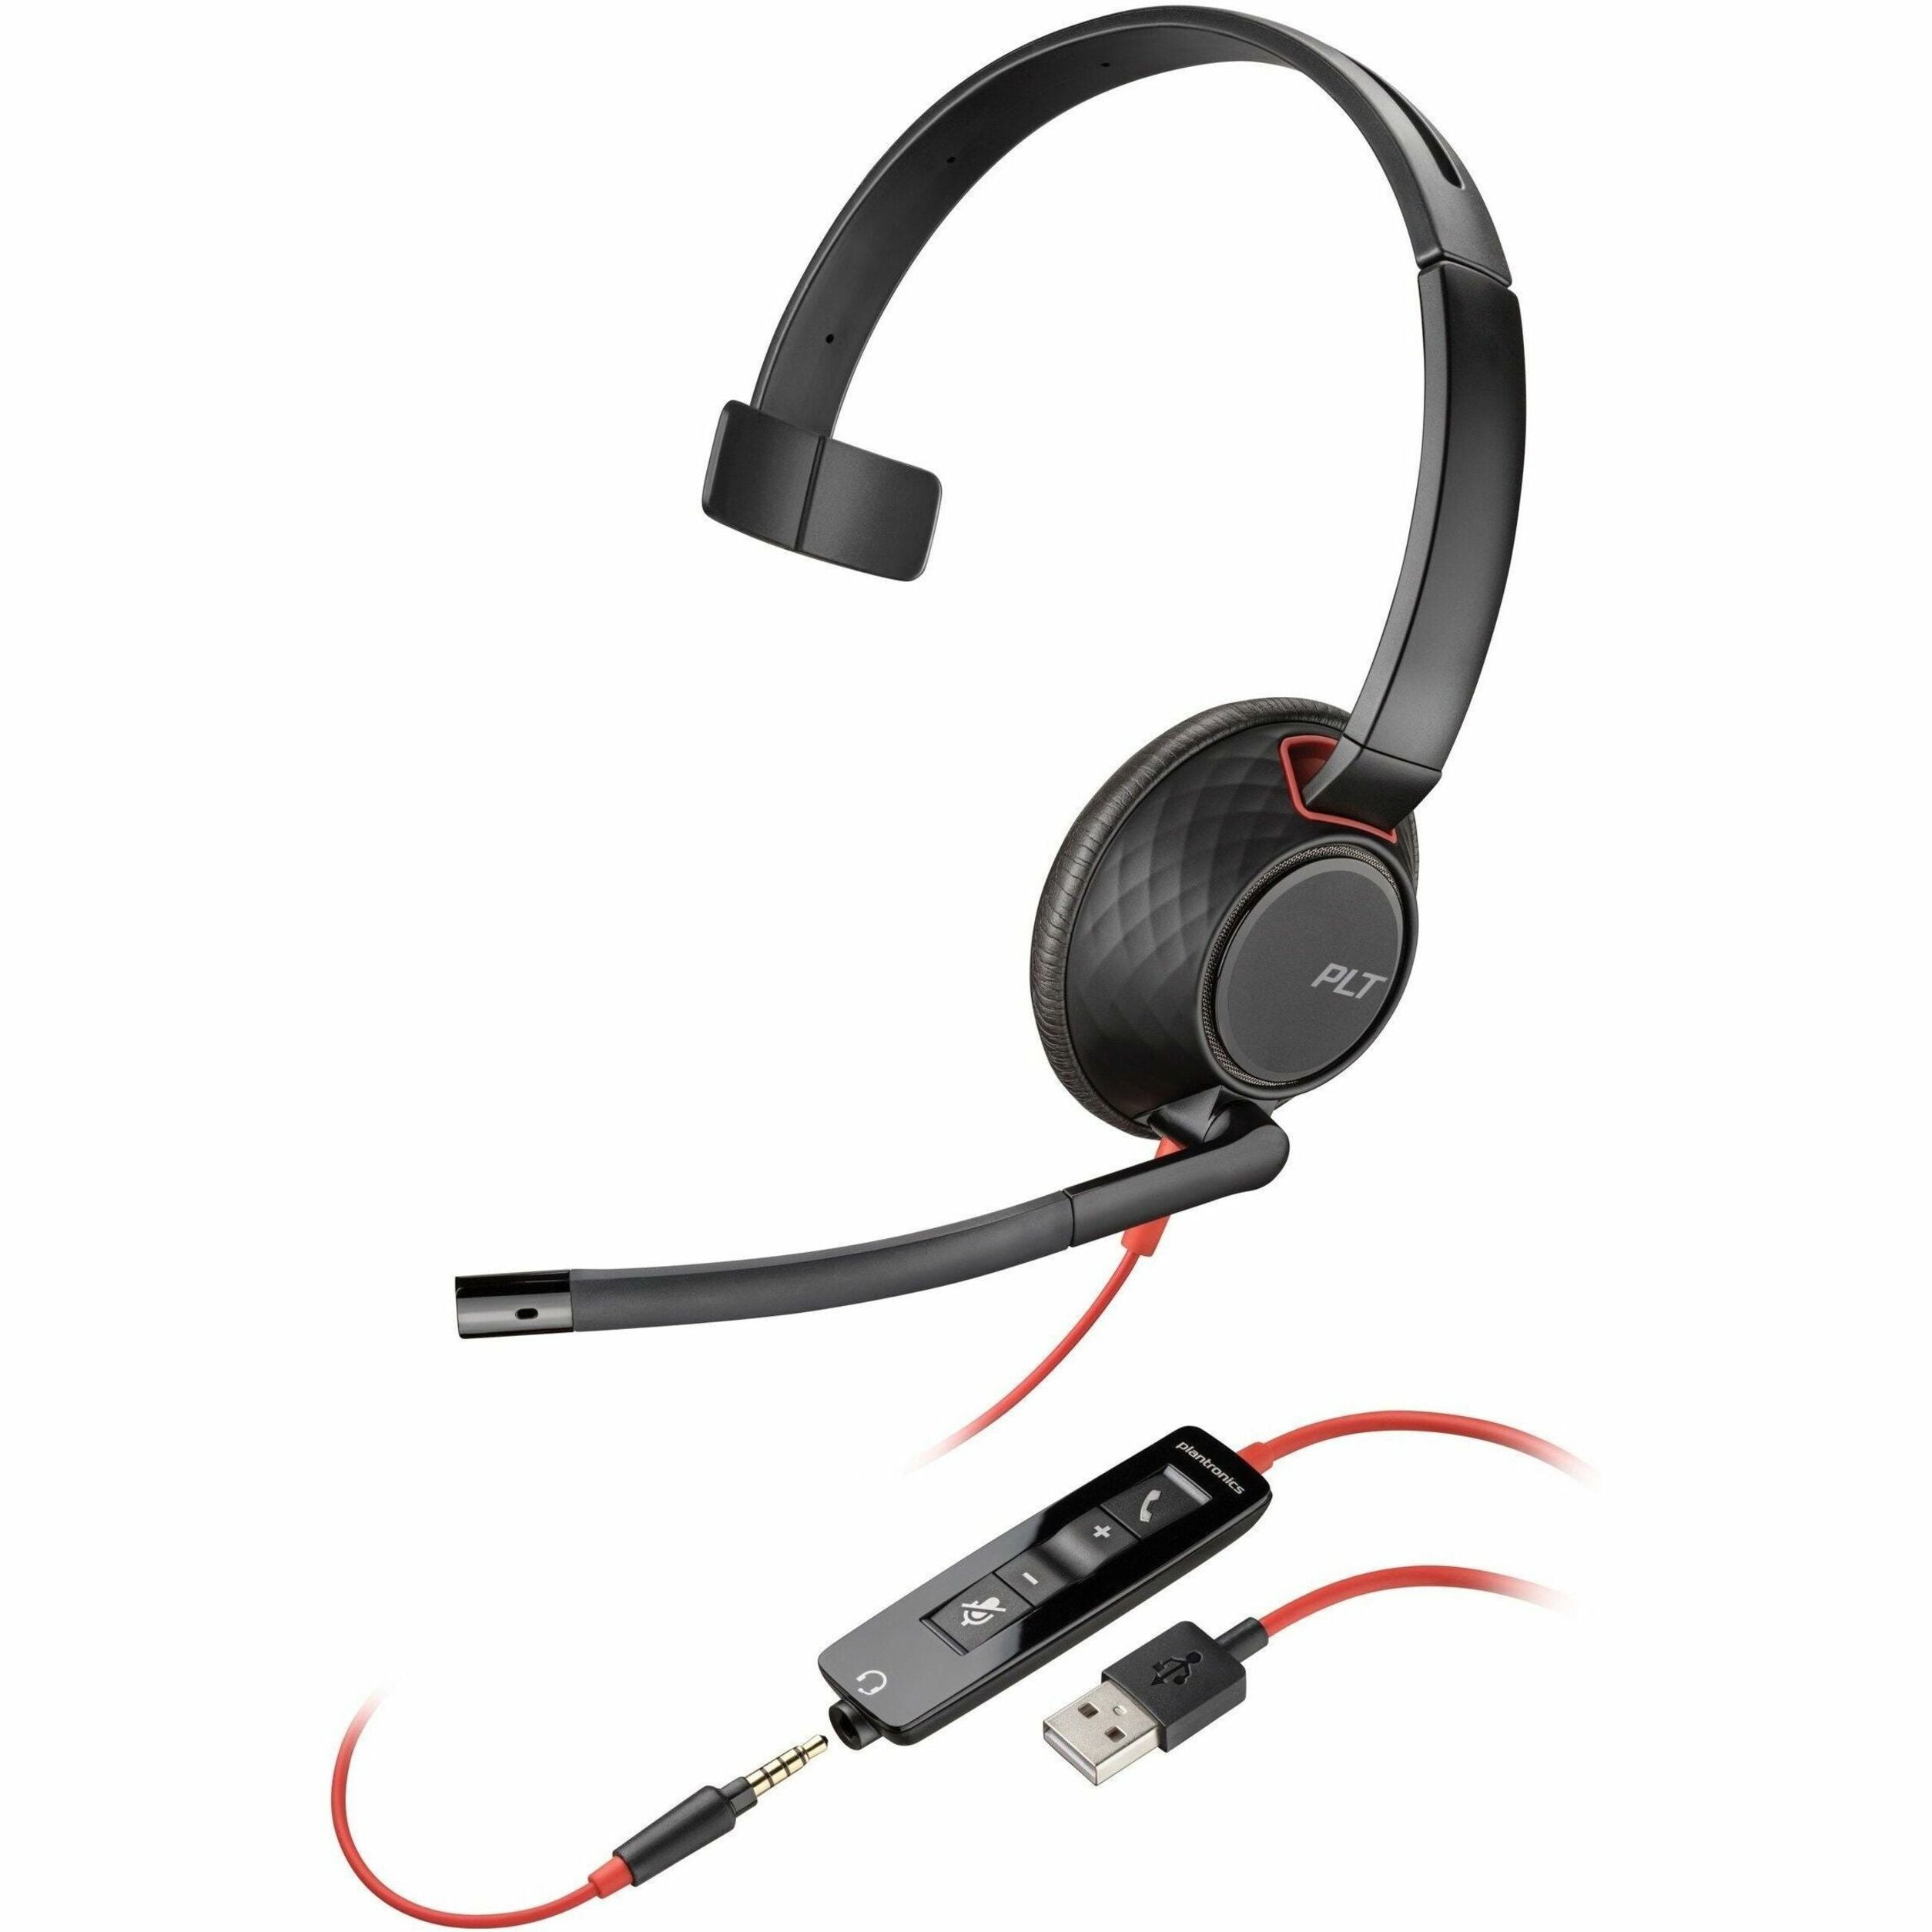 Poly 80R98AA Blackwire 5210 Headset, On-ear Monaural Headset with Noise Cancelling Microphone